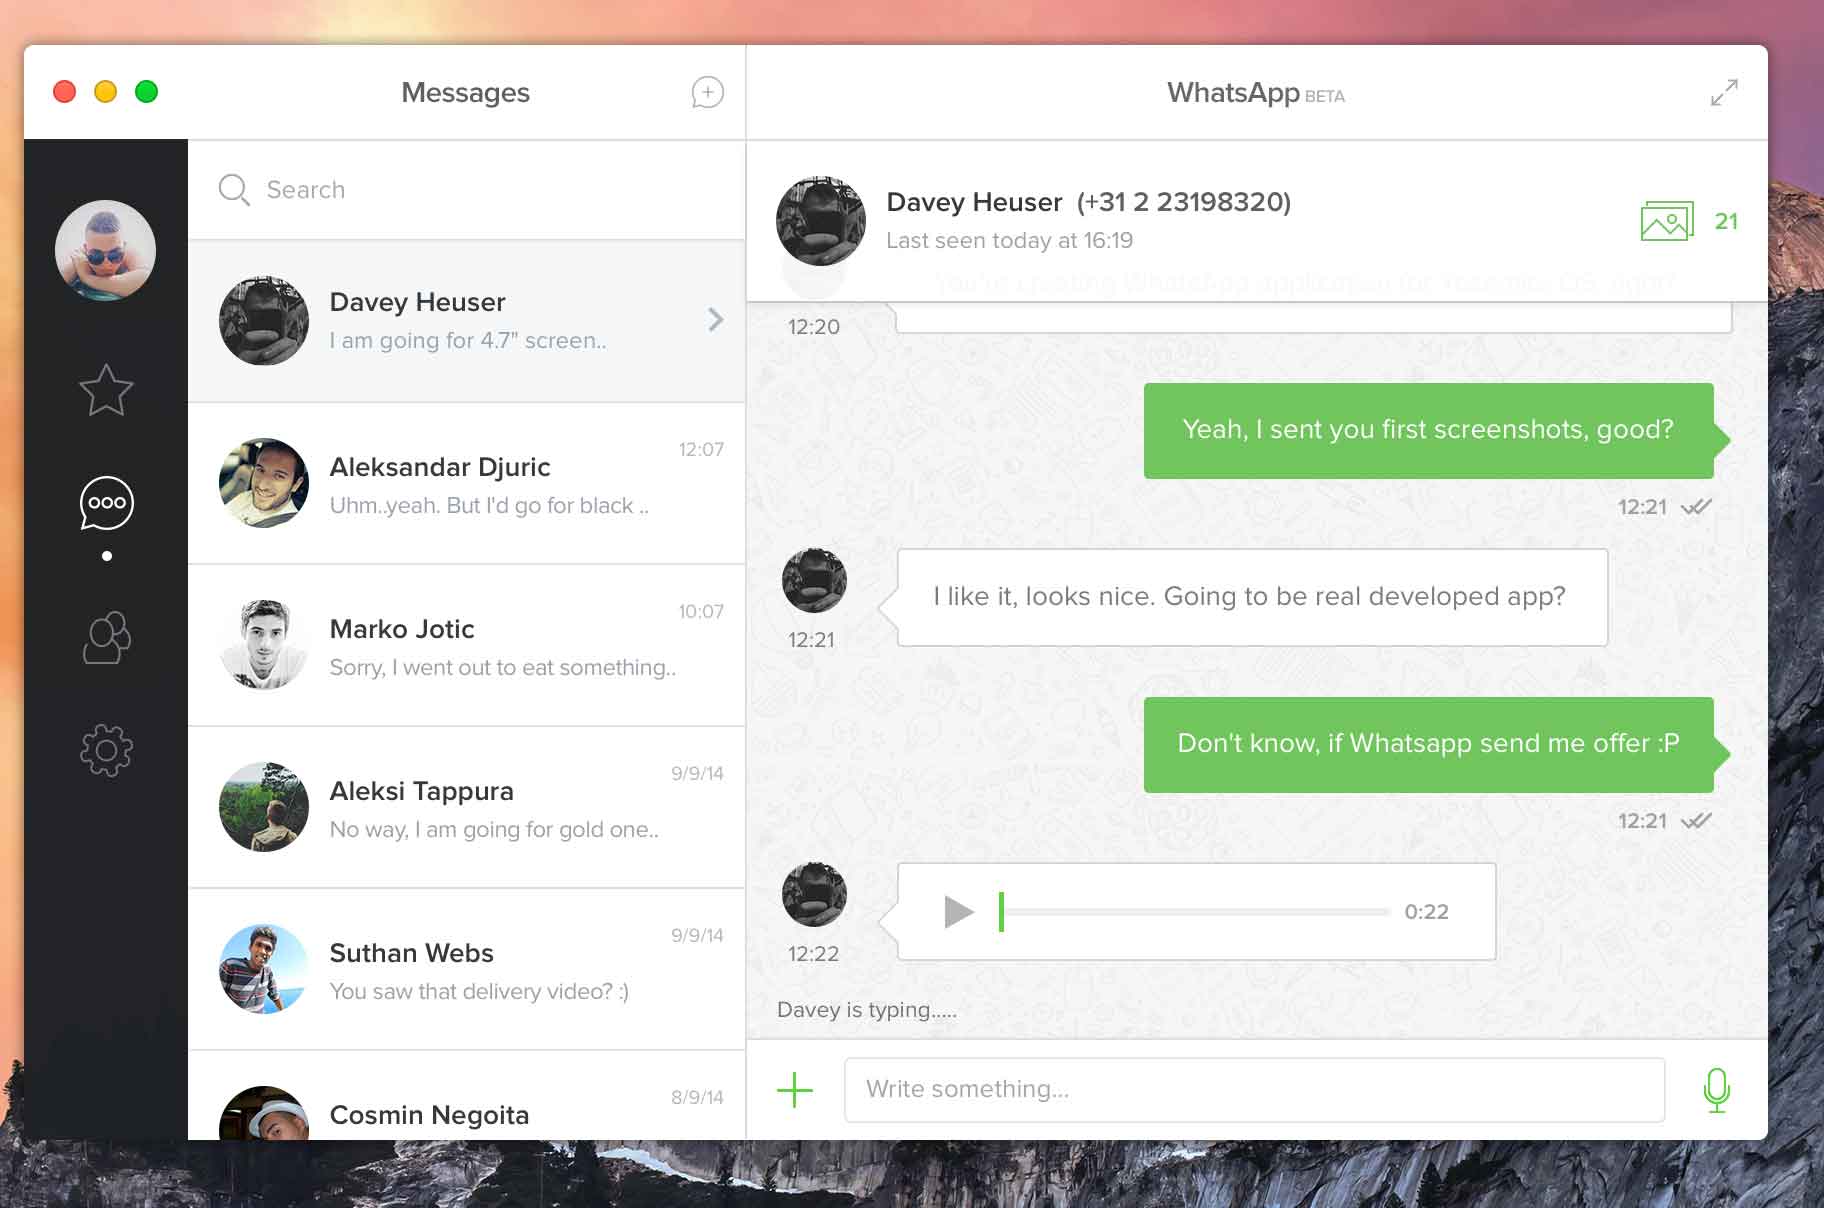 whatsapp for mac without bluestacks